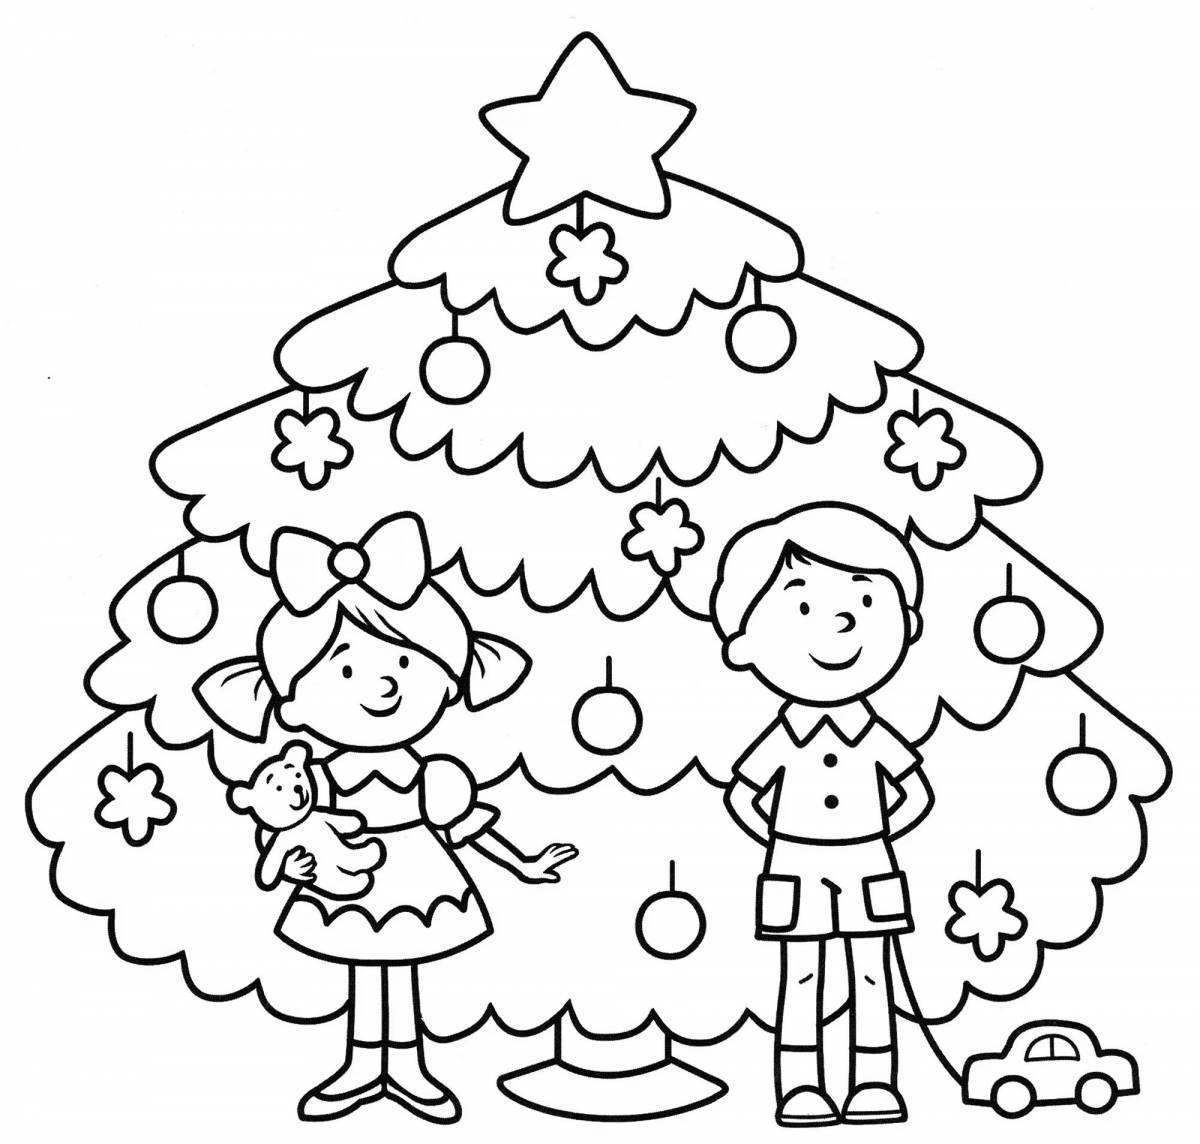 Coloring page glamorous dance around the tree